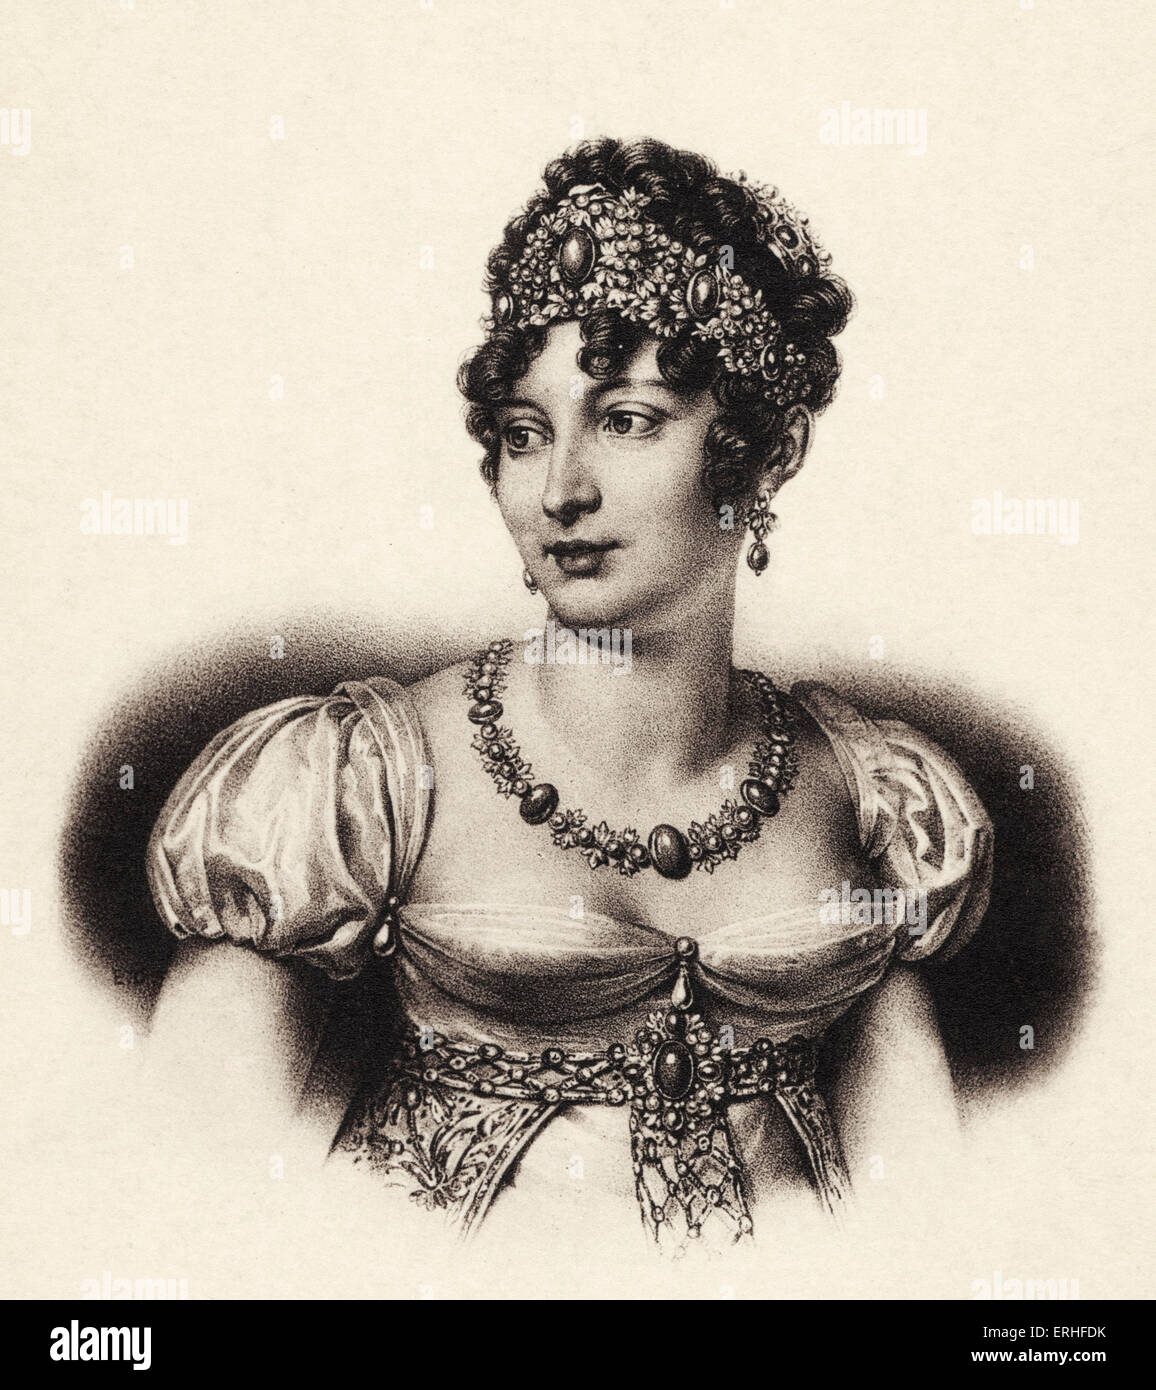 Caroline Bonaparte - portrait in headdress, with jewelry and décolleté Empire-style dress.  Third sister of Napoleon I. 1782 - Stock Photo